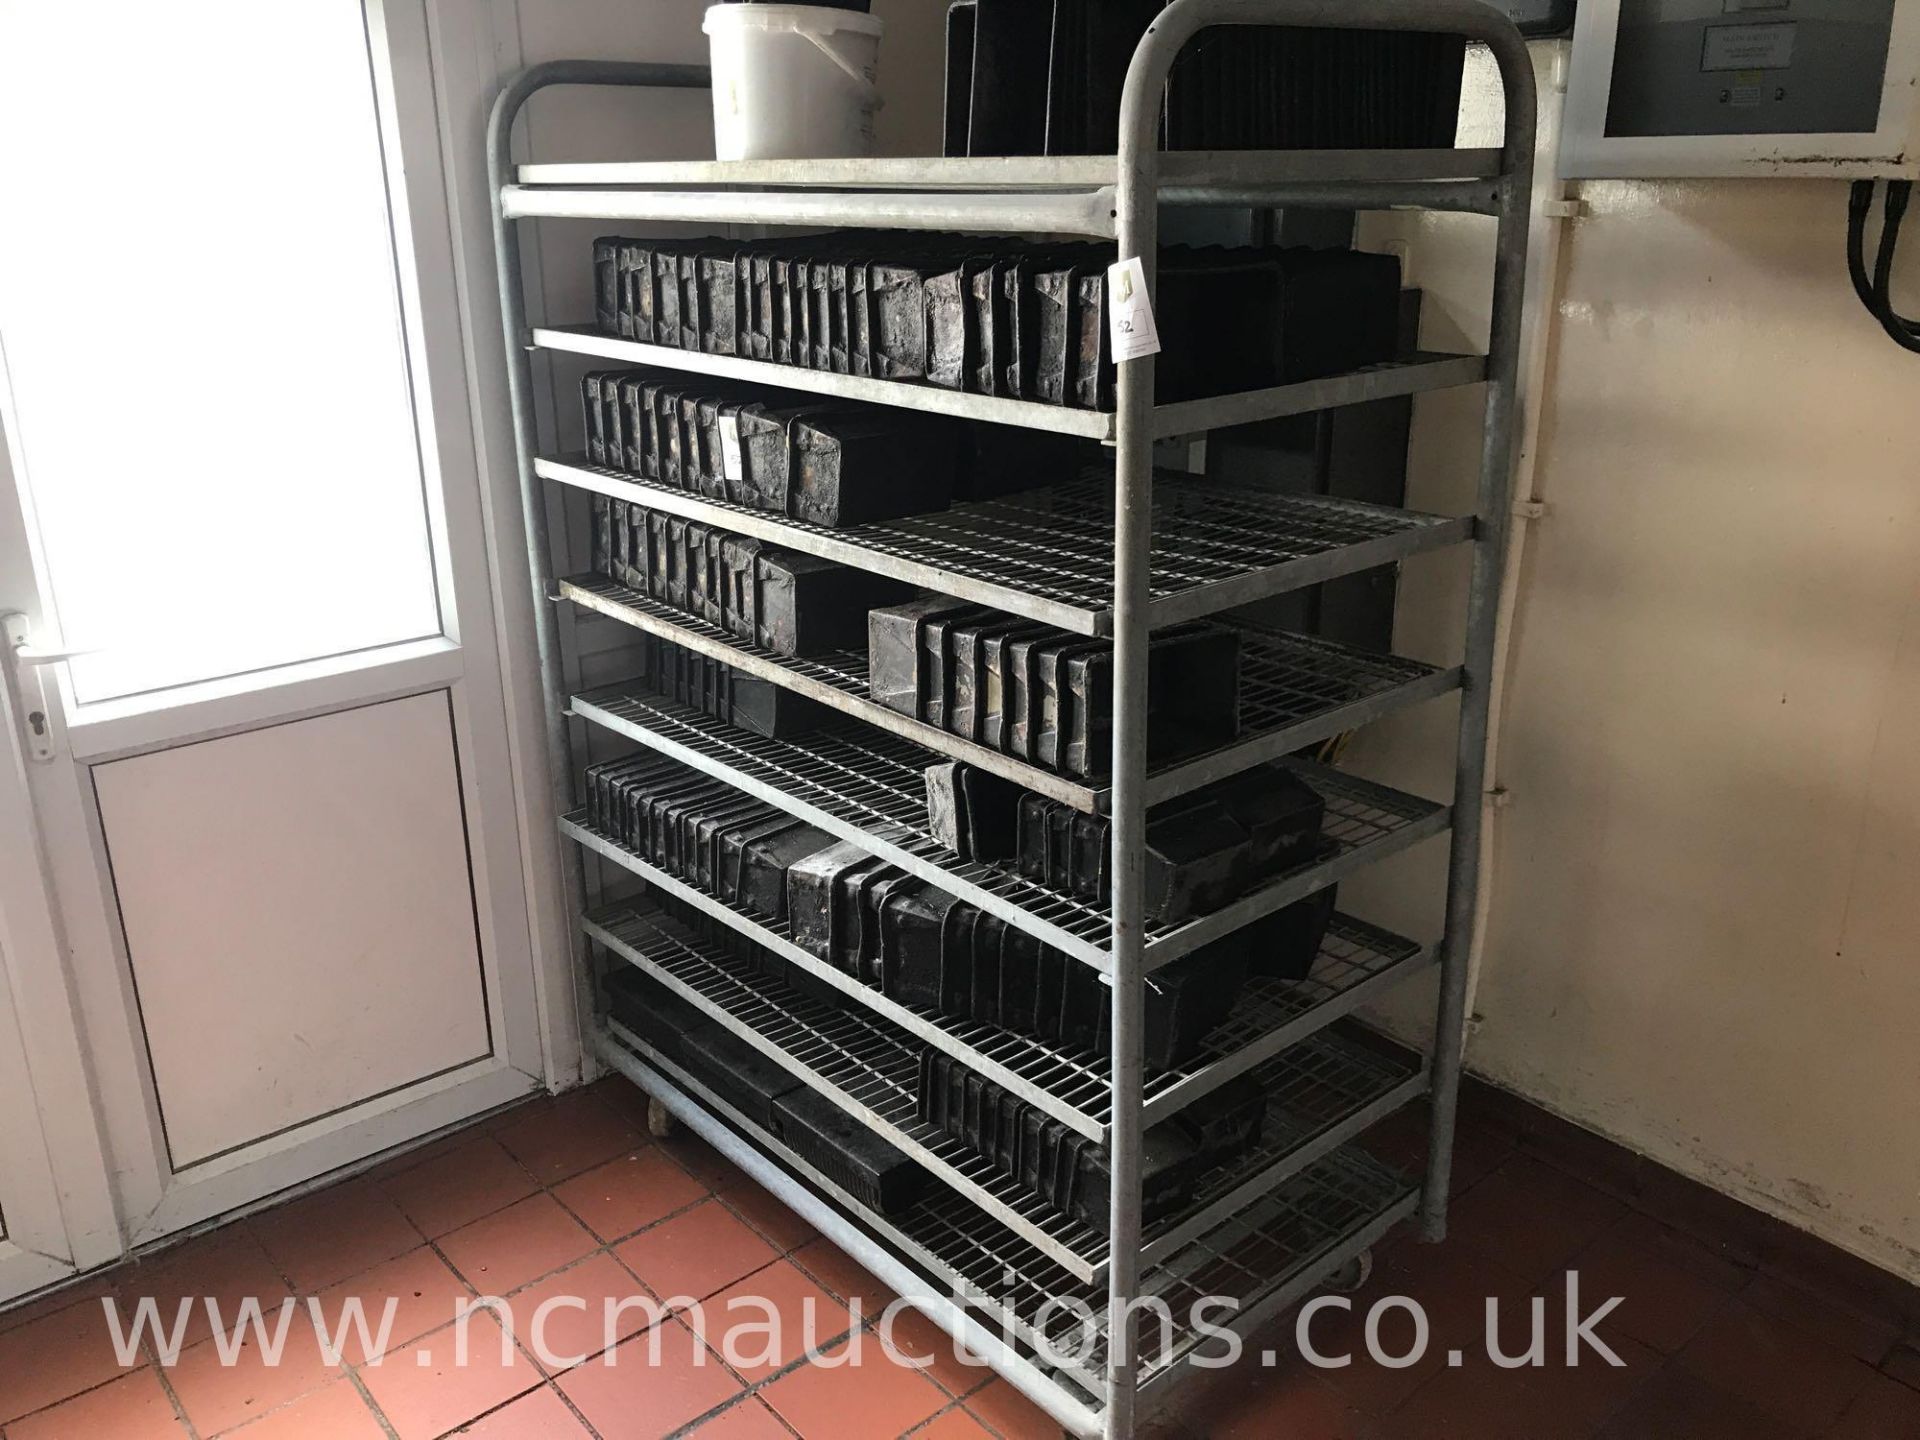 Wheeled Shelving Rack to Include a Variety of Bread Baking Tins - Image 2 of 3